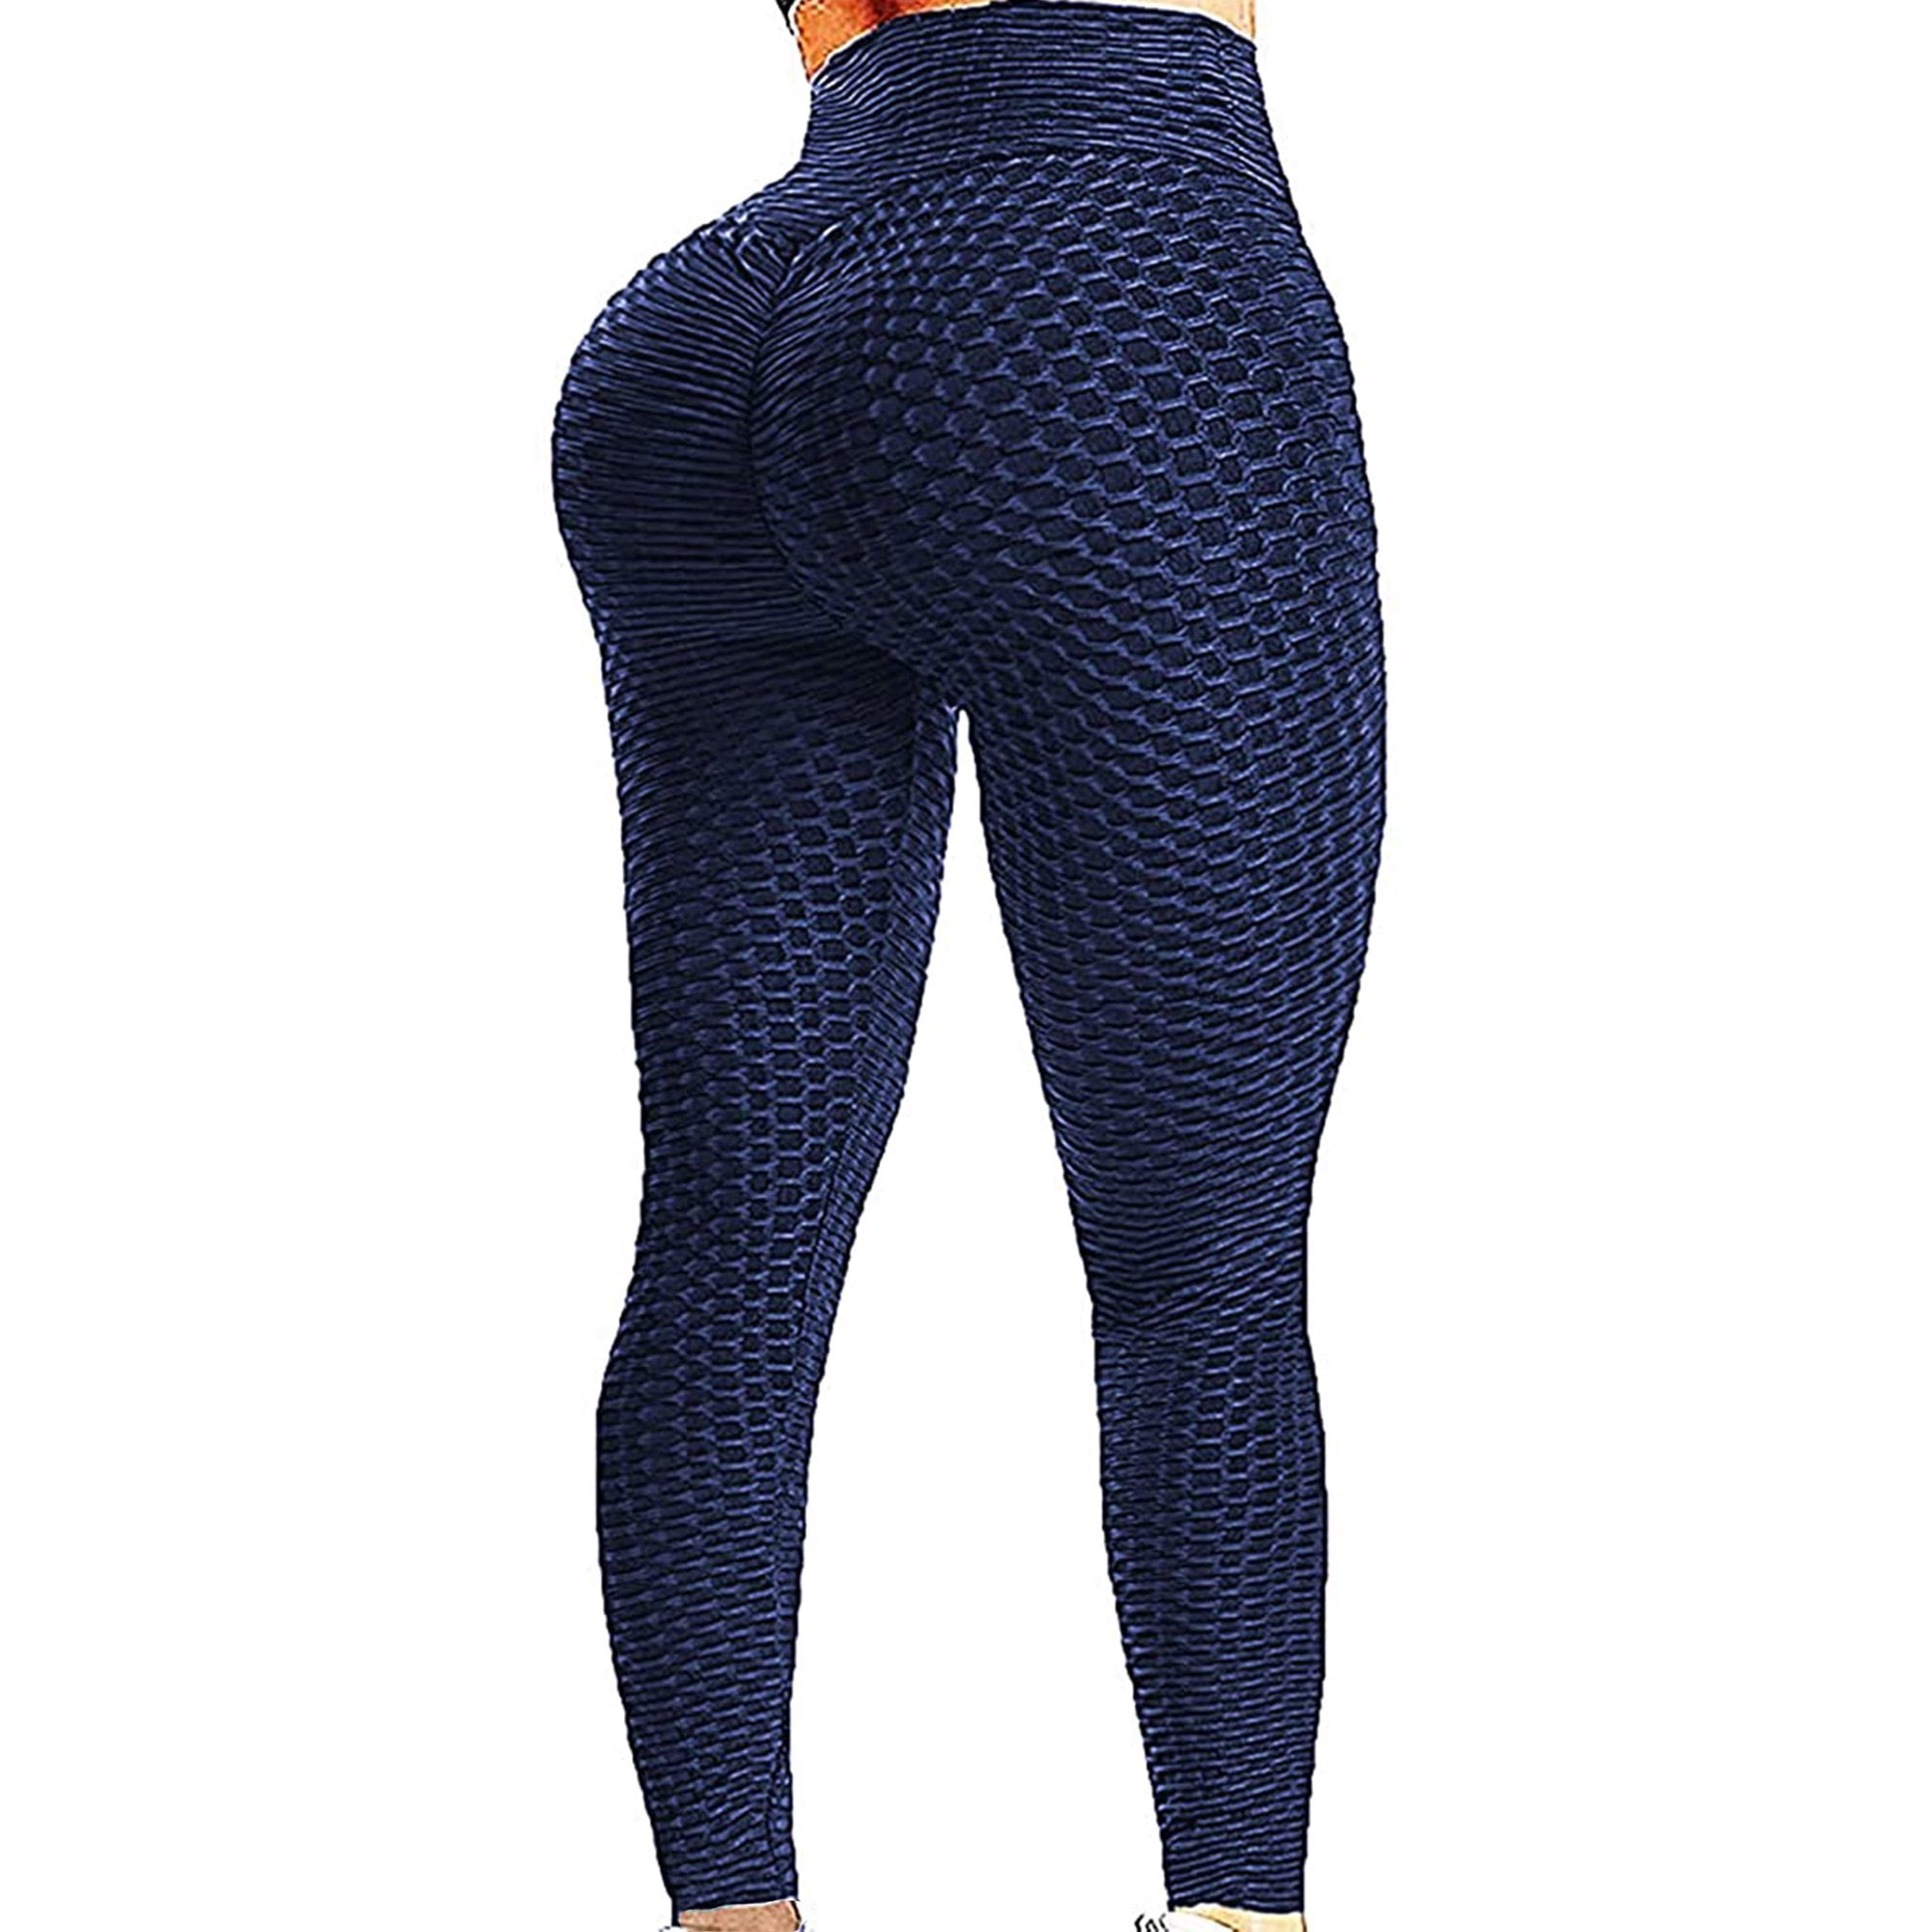 Latona Beirut on Instagram: Push up high waist stretchy leggings 🥰  Available in 4 colors🥰 Sizes: S/M/L/XL Fast delivery 🚚, exchangeable🥰  For orders: DM